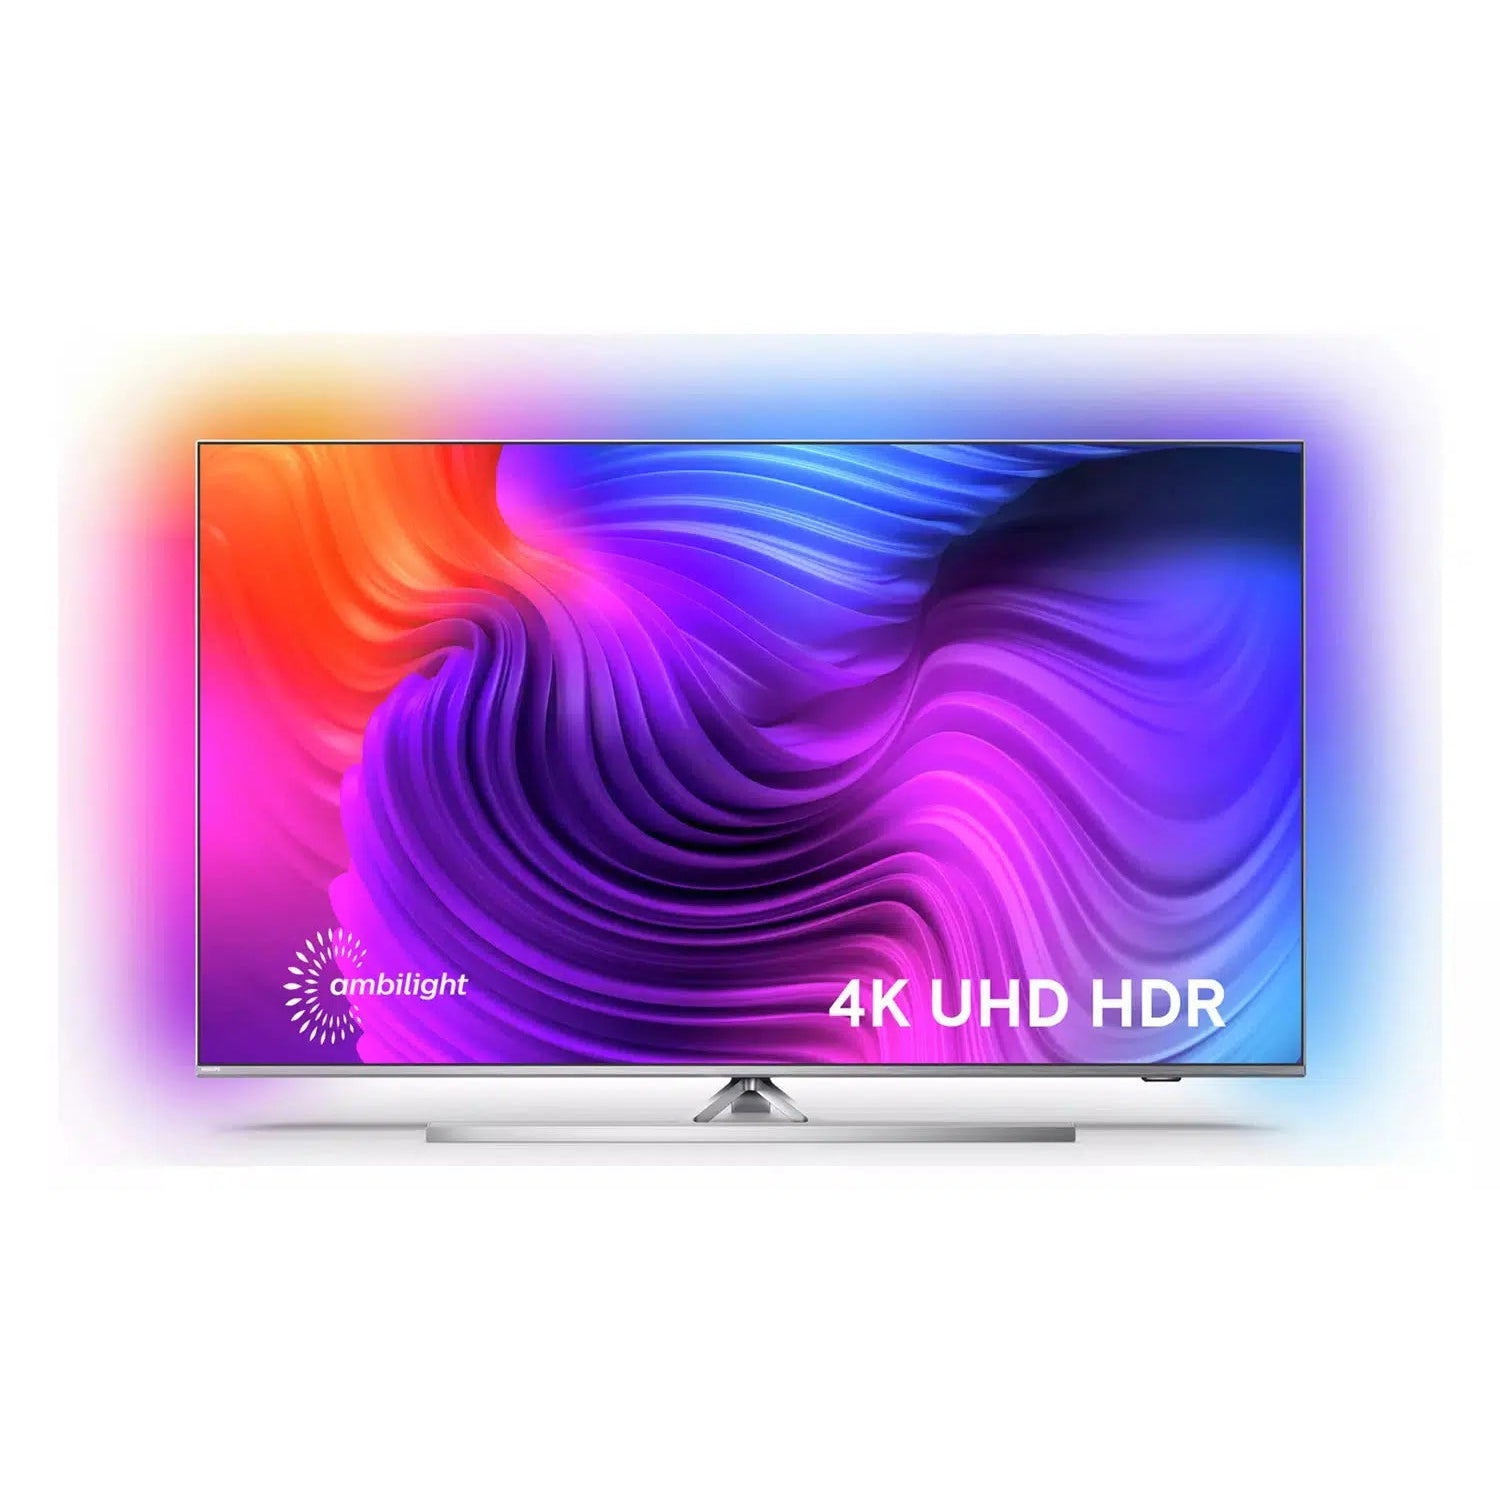 Philips 50 Inch 50PUS8536 Smart 4K UHD HDR LED Ambilight TV - Refurbished Excellent